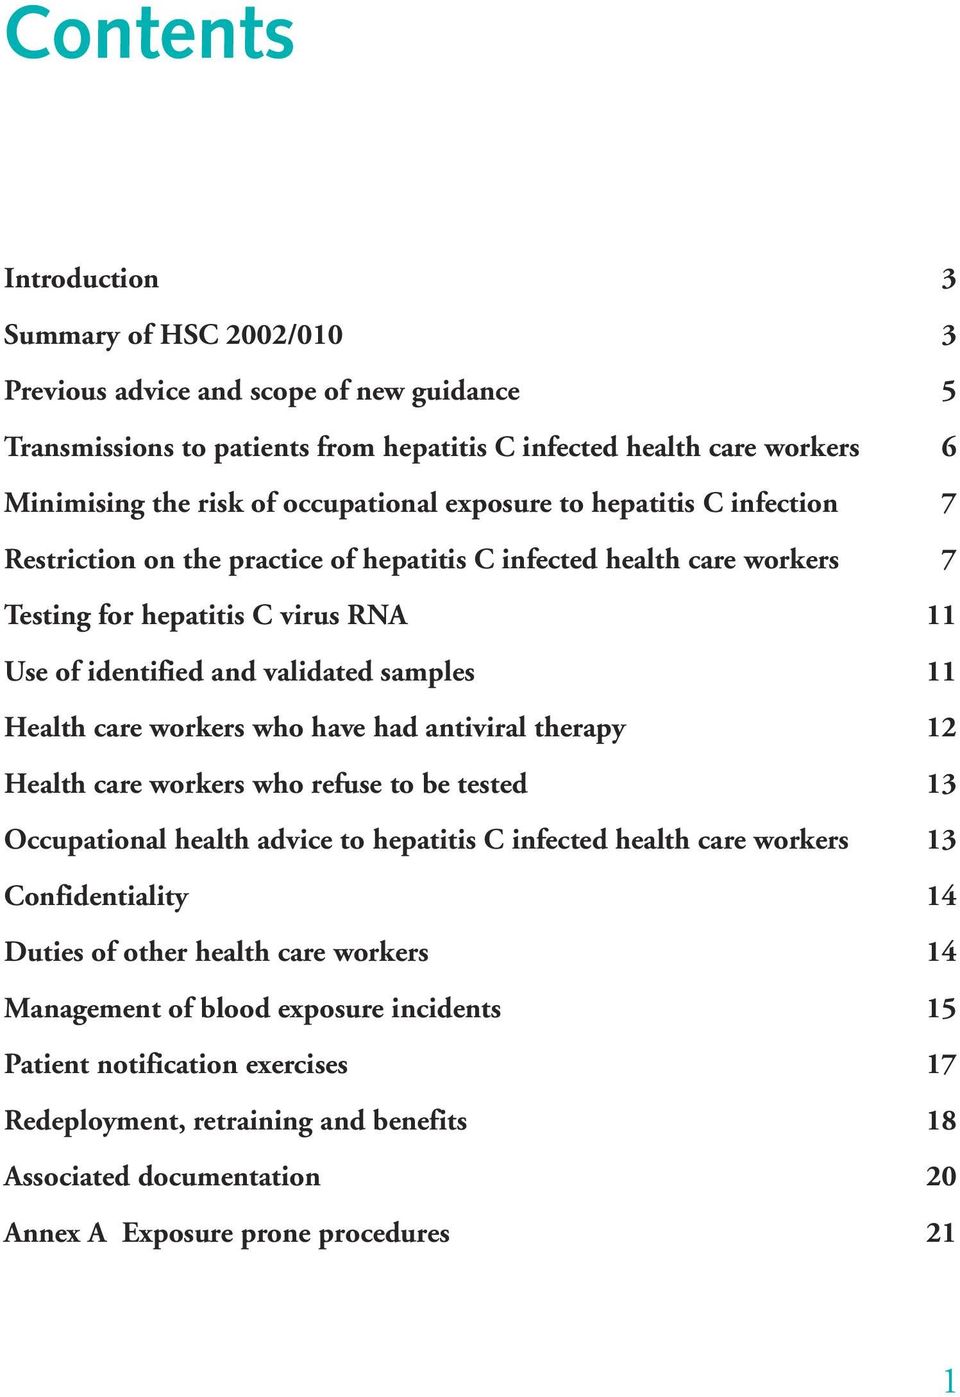 11 Health care workers who have had antiviral therapy 12 Health care workers who refuse to be tested 13 Occupational health advice to hepatitis C infected health care workers 13 Confidentiality 14